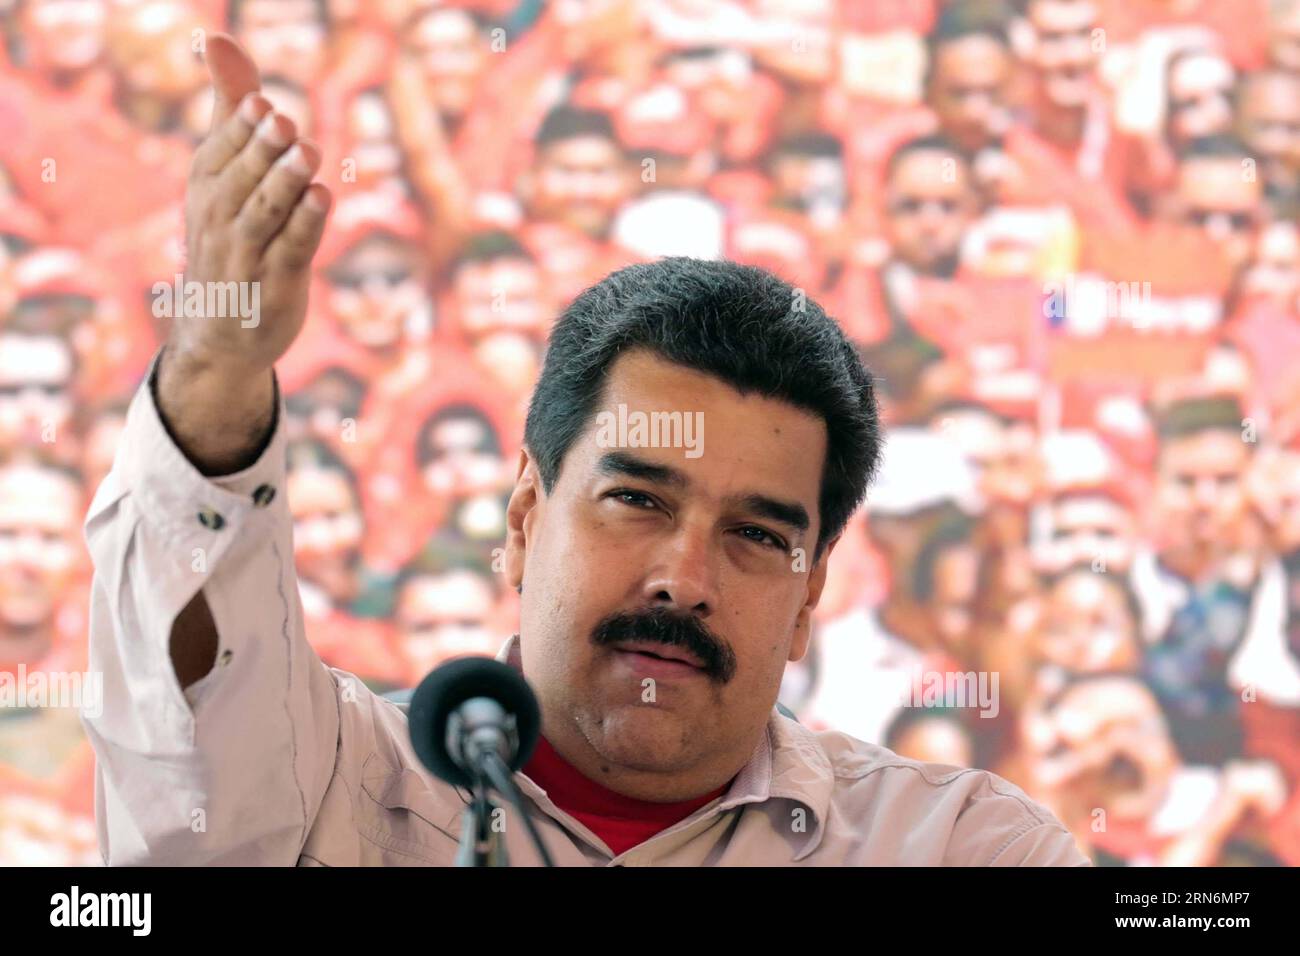 Image provided by Venezuela s Presidency shows Venezuelan President Nicolas Maduro delivering a speech during the meeting with workers of Orinoco Belt, at the Morichal Oilfield, state of Monagas, Venezuela, on Aug. 1, 2015. According to local press, Maduro praised on Saturday the Orinoco Belt as the most important project for the economic future and the integral development of Venezuela with a production of 1,326,000 daily barrels of oil, during a day of work in the Morichal Oilfield concerning the plan of the relaunch and repositioning of the plan of integral development of the Orinoco Belt. Stock Photo